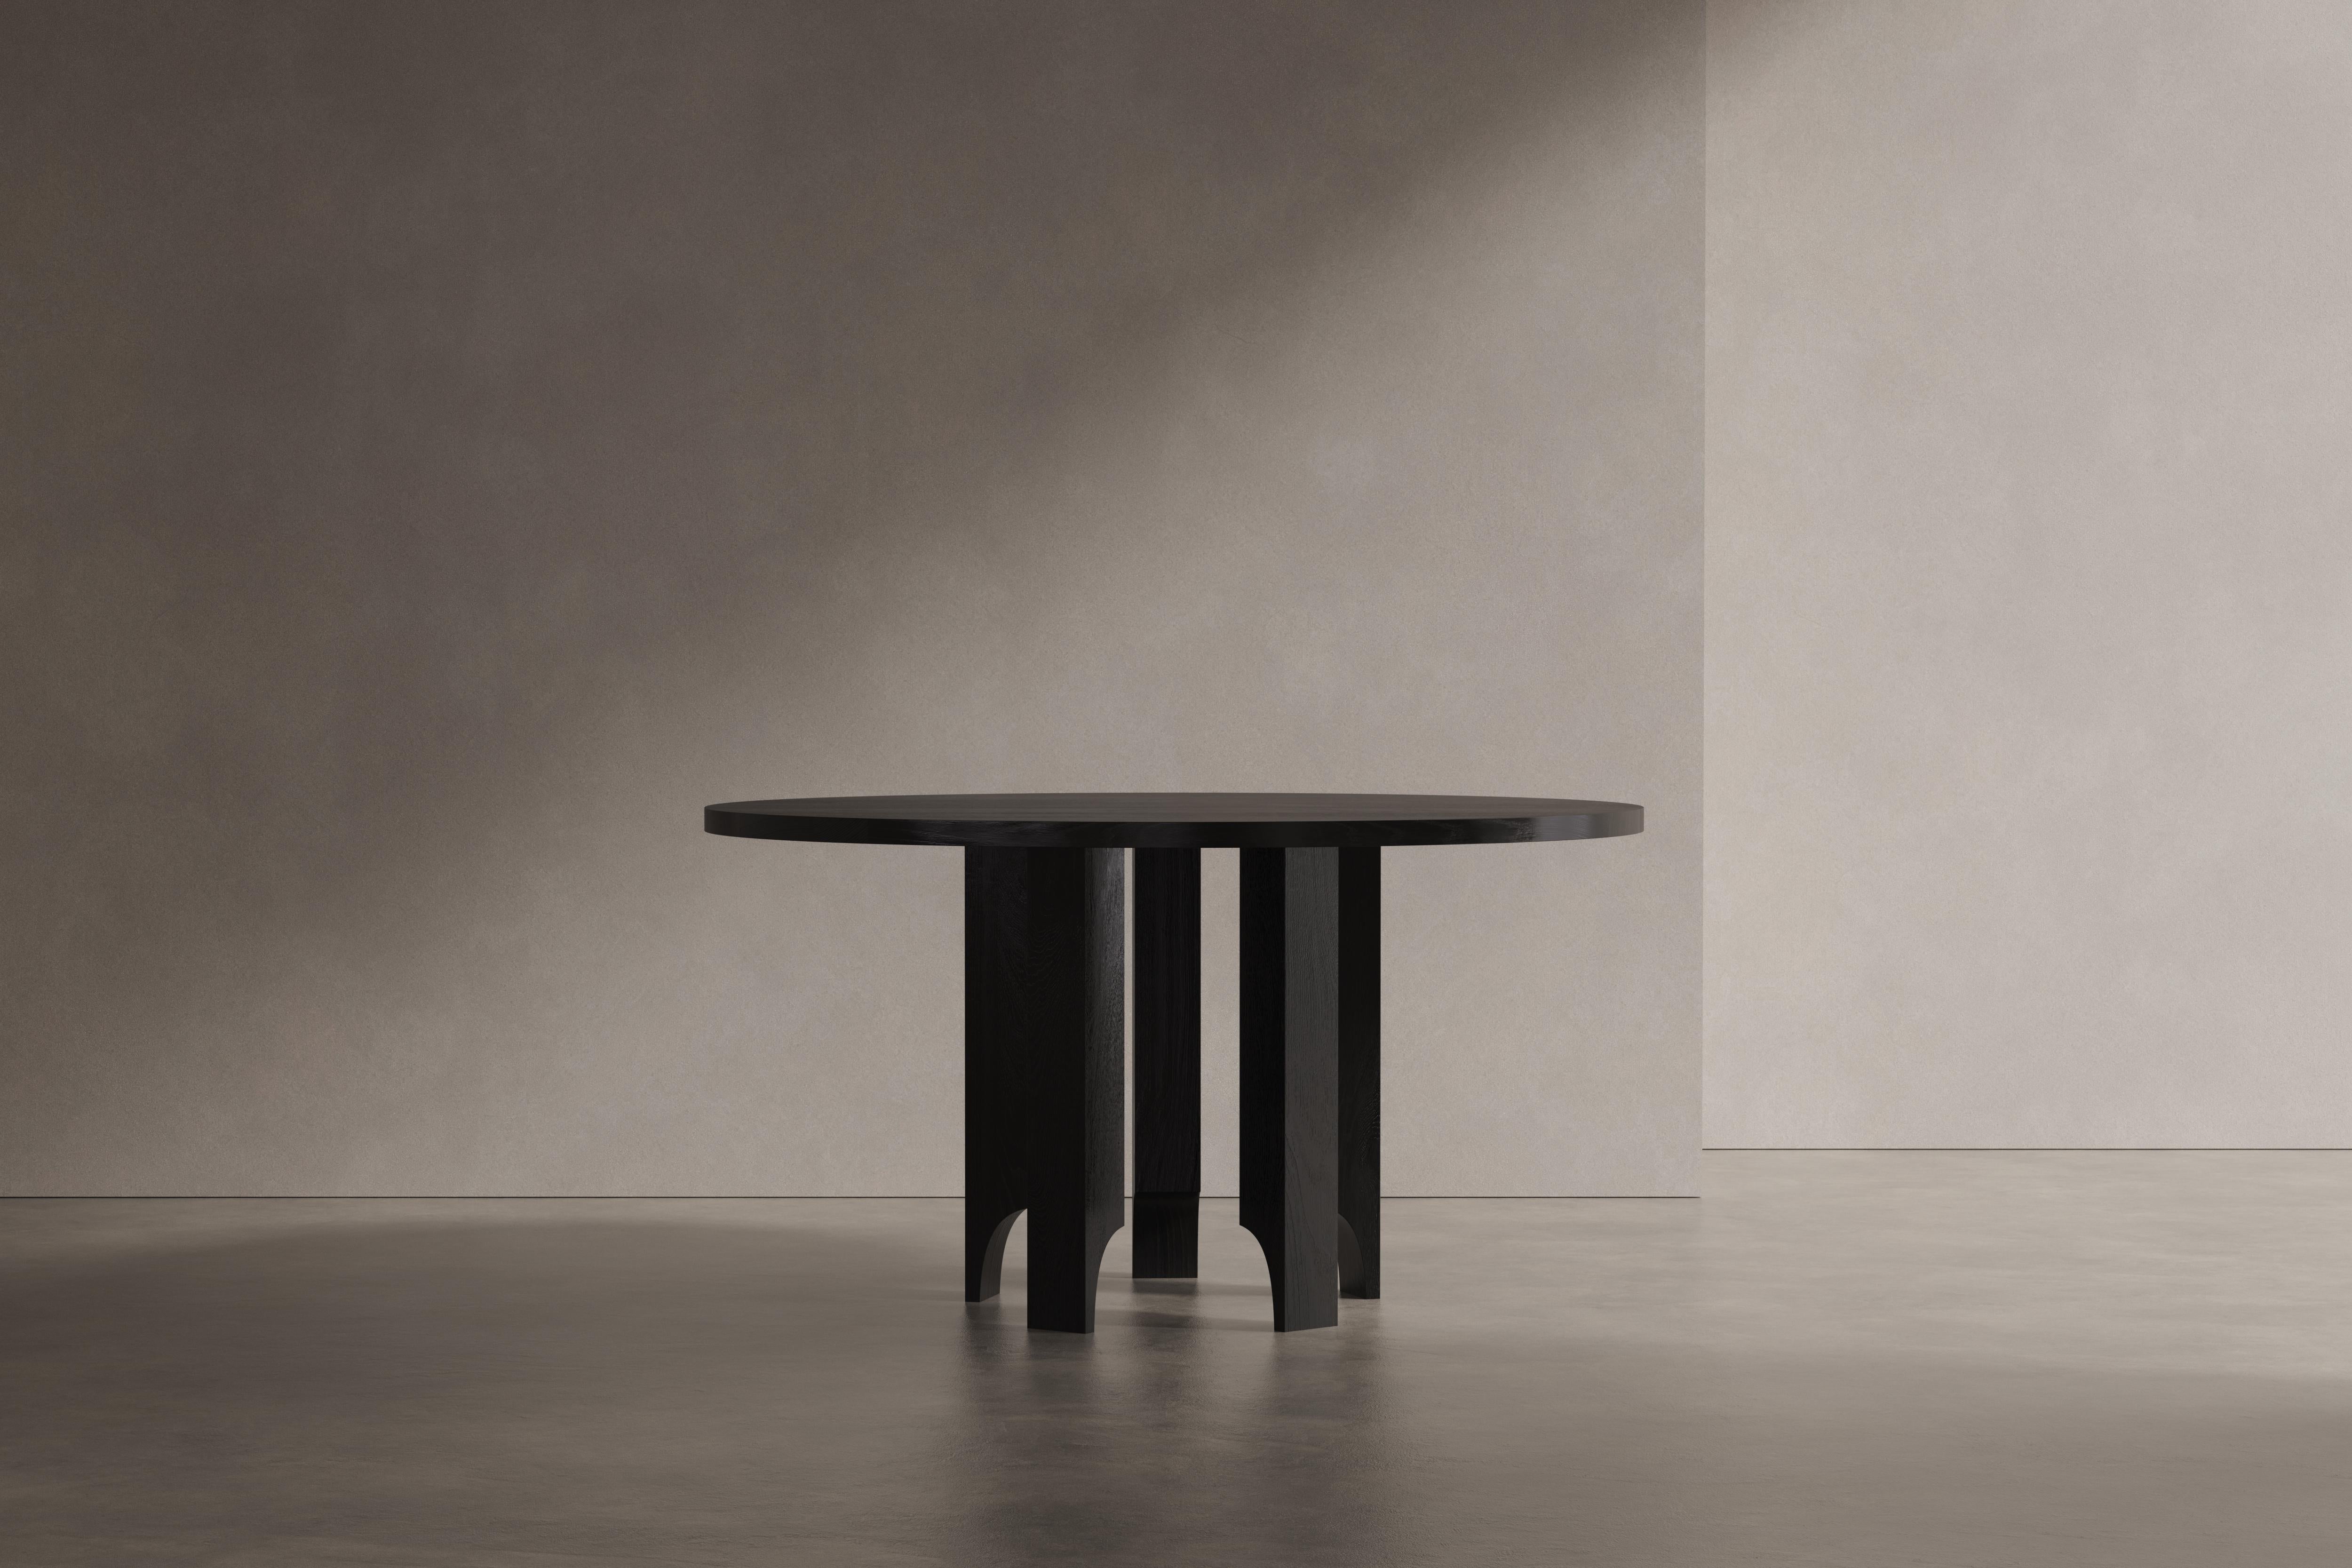 Bringing lightness and elegance to its heavy materials and shapes. The Acer Table is a balancing act between its heavy solid volumes and light pointing legs featuring semi arched voids. Designed by Aad Bos and crafted in the Netherlands. 

Mokko is